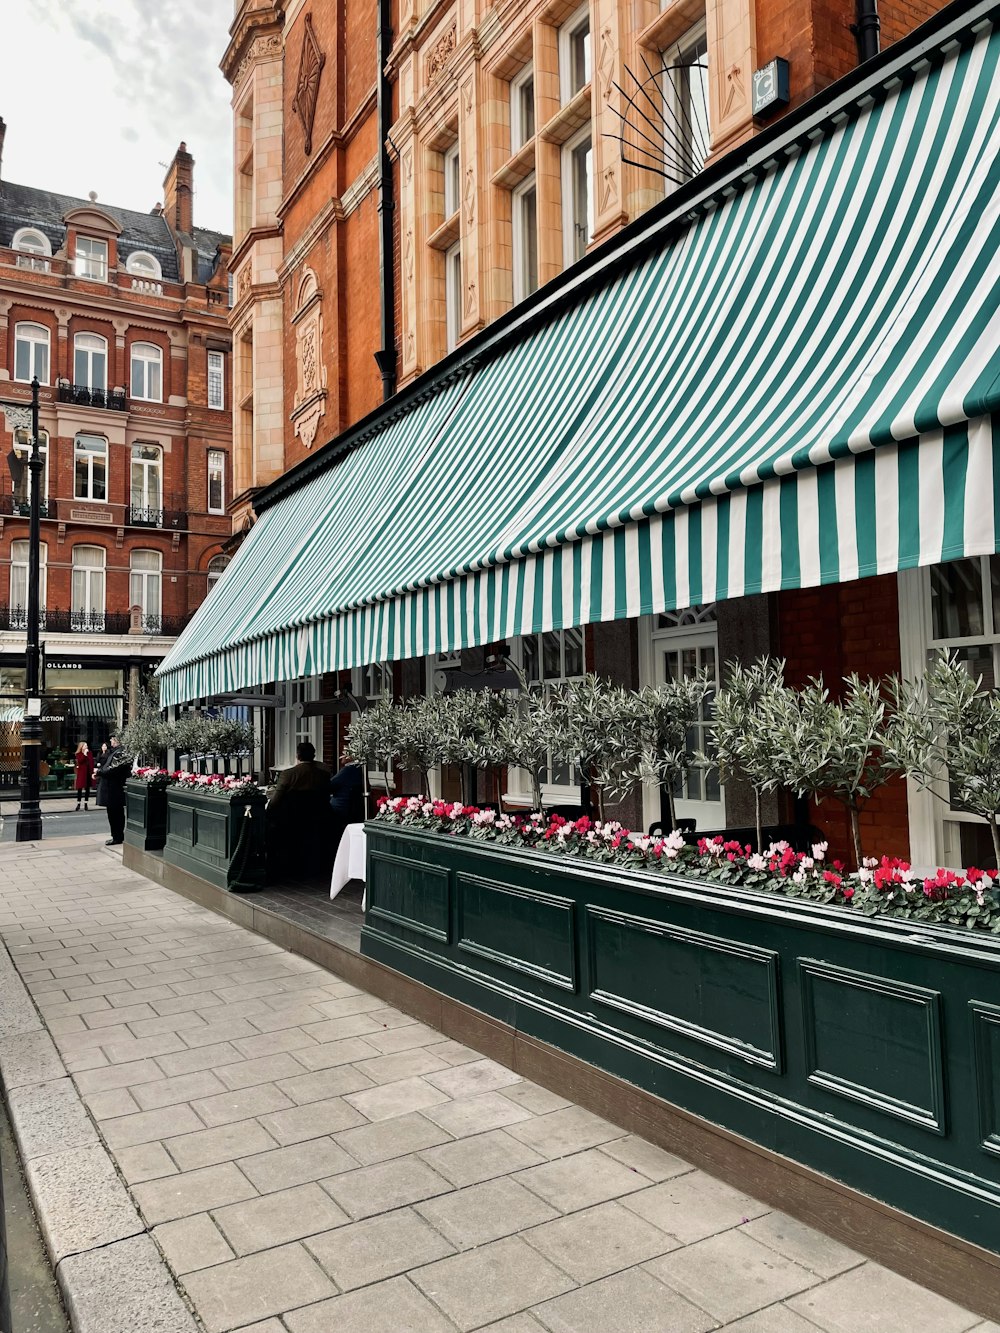 a green and white striped awning next to a building